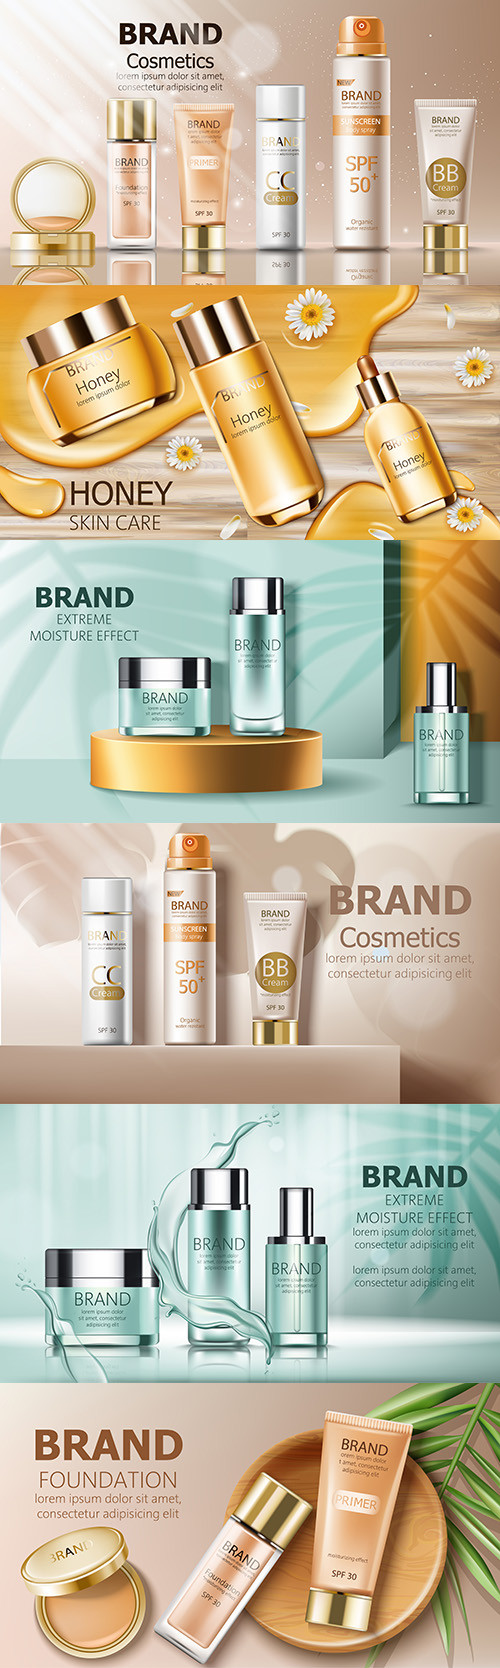 Body sunscreen and cosmetic containers on golden catwalk
